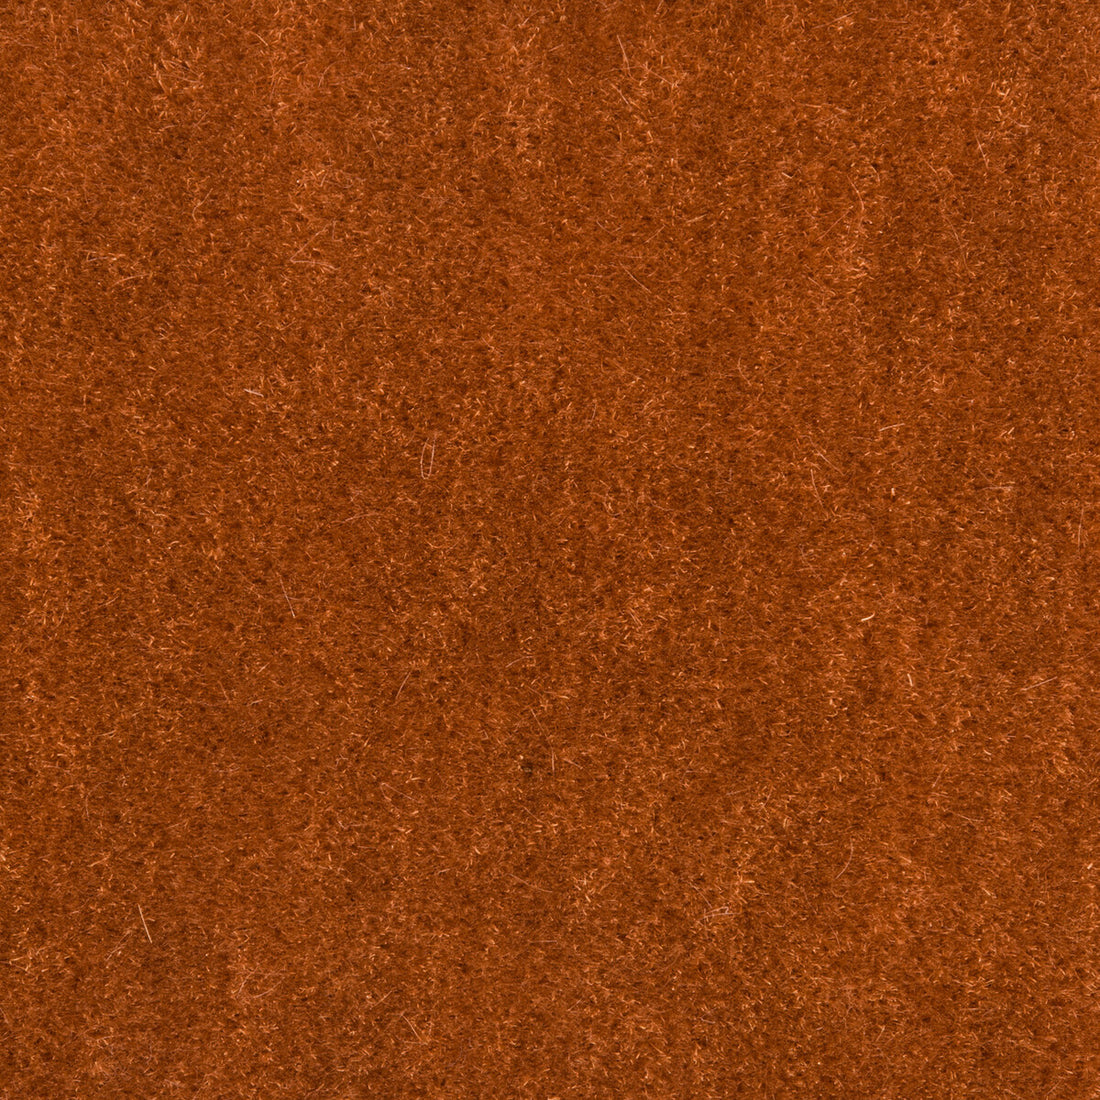 Bachelor Mohair fabric in cognac color - pattern 8014101.416.0 - by Brunschwig &amp; Fils